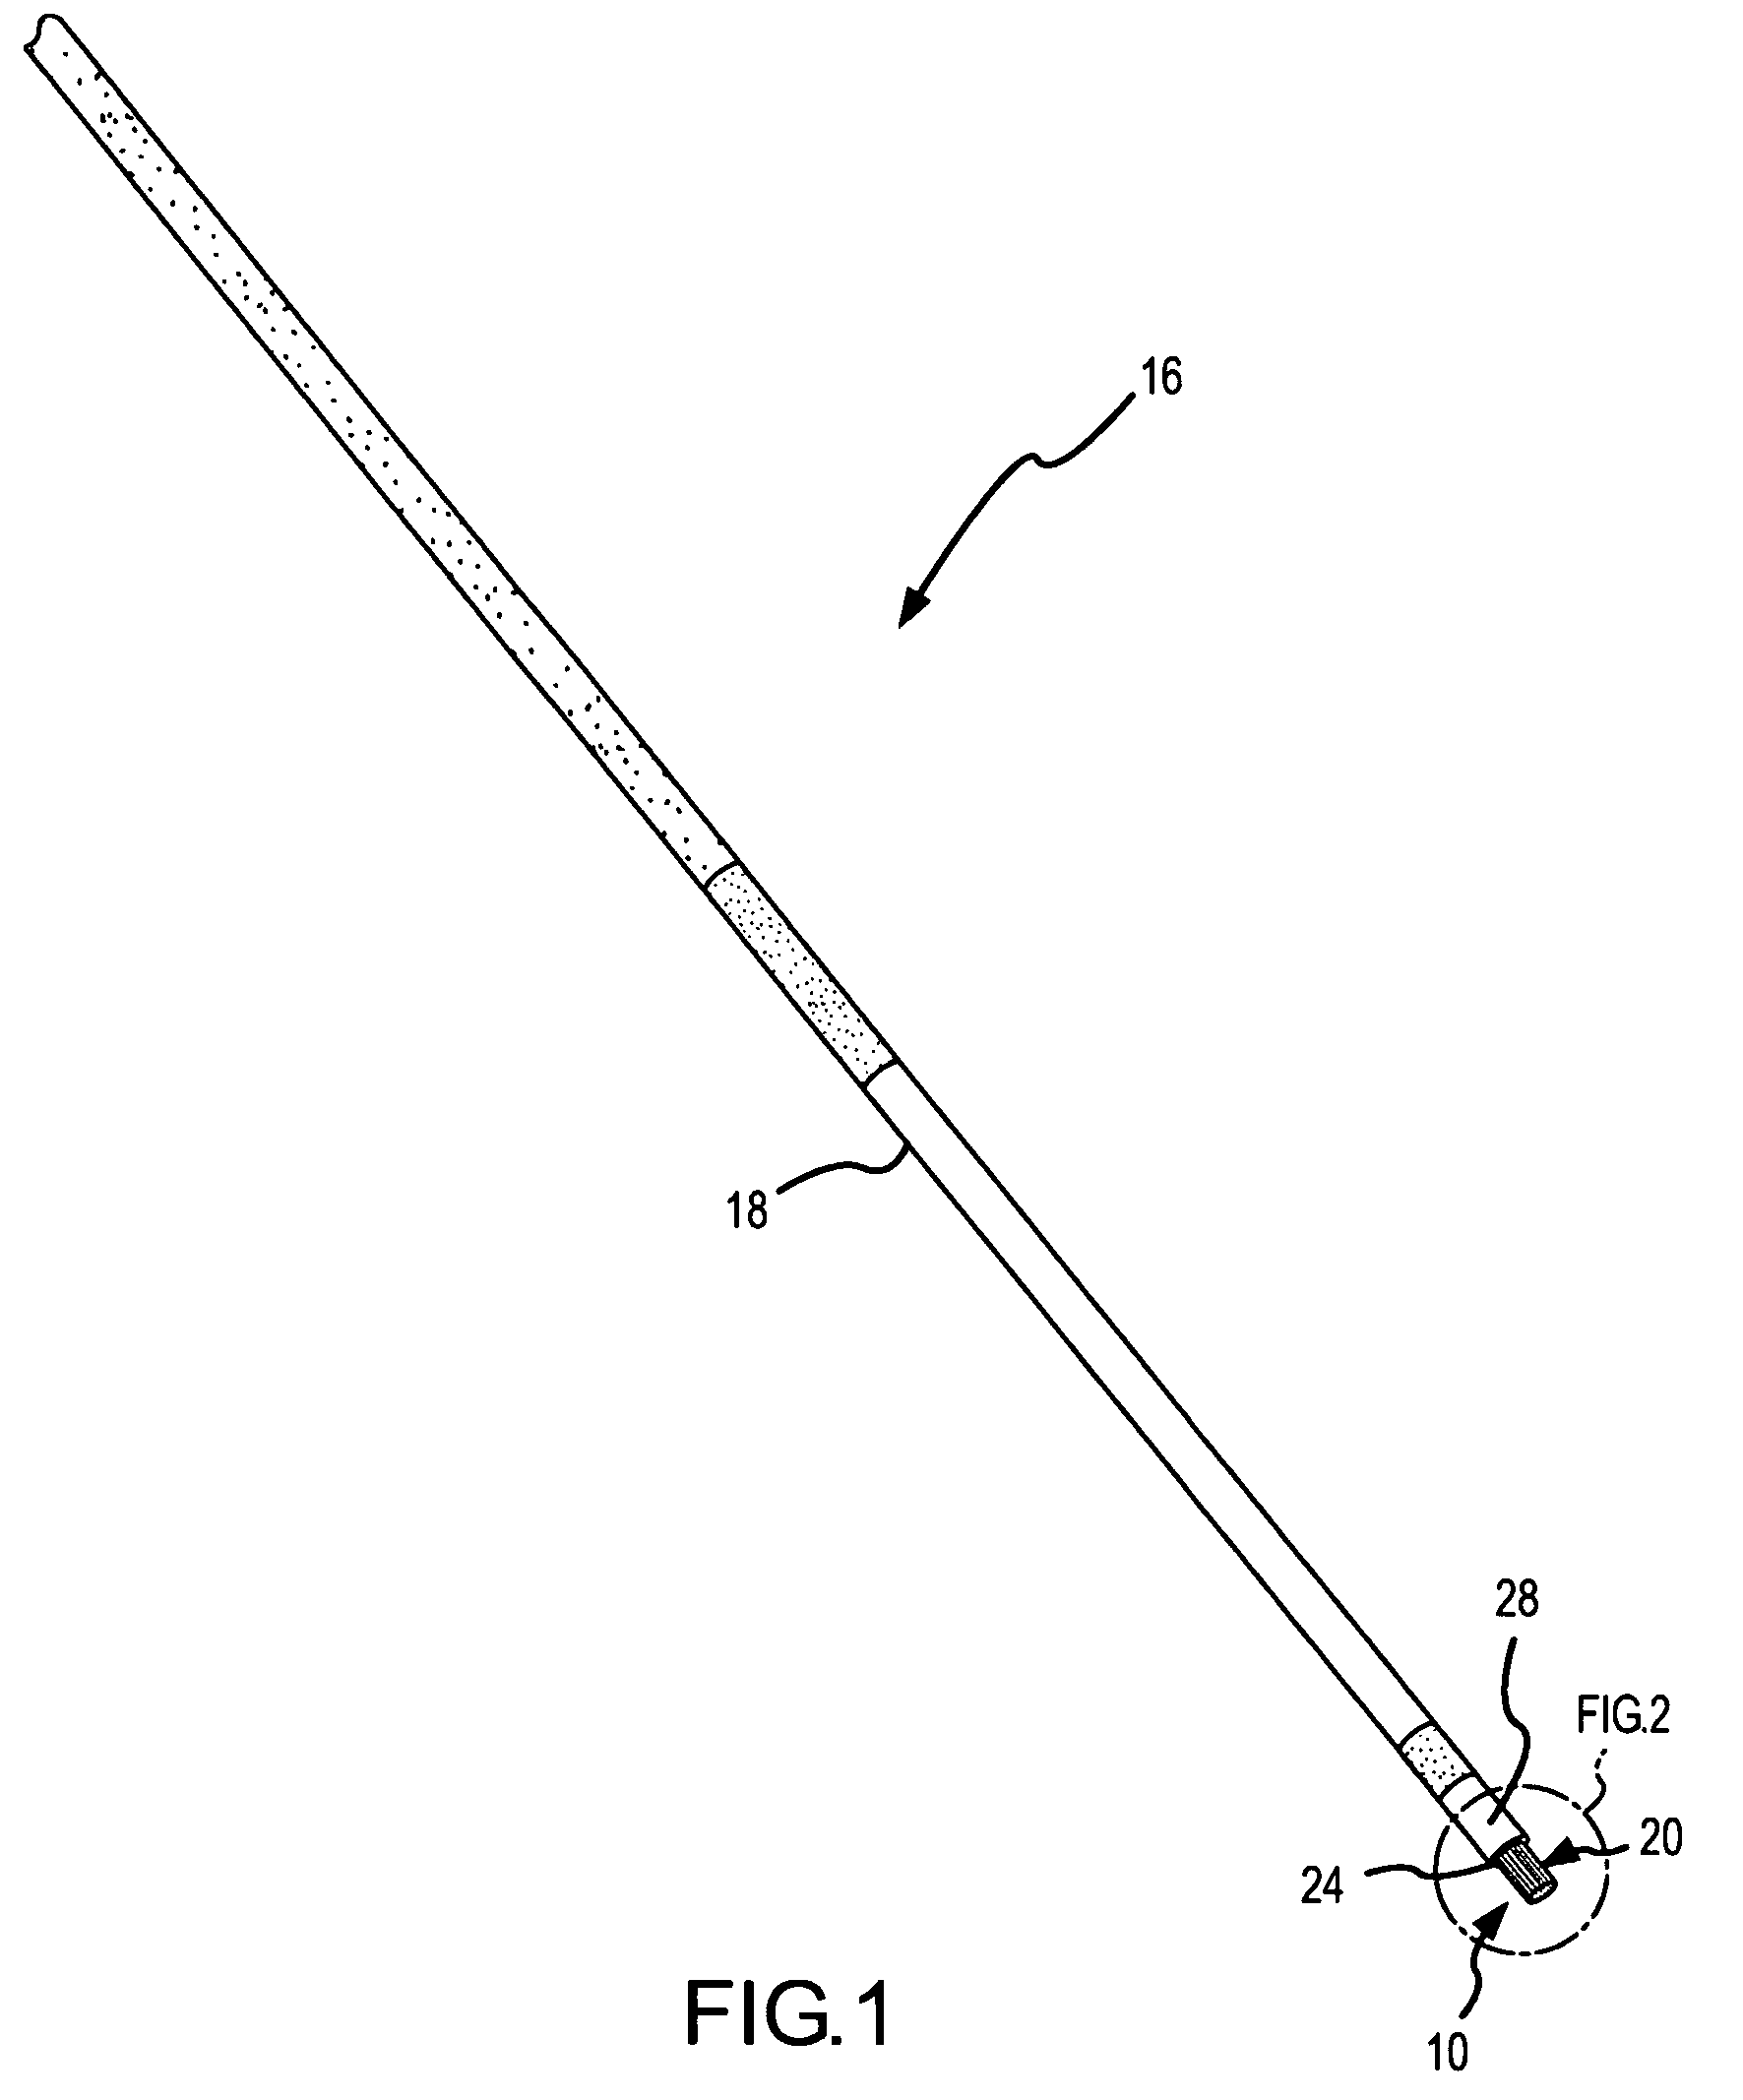 Bipolar conforming electrode catheter and methods for ablation